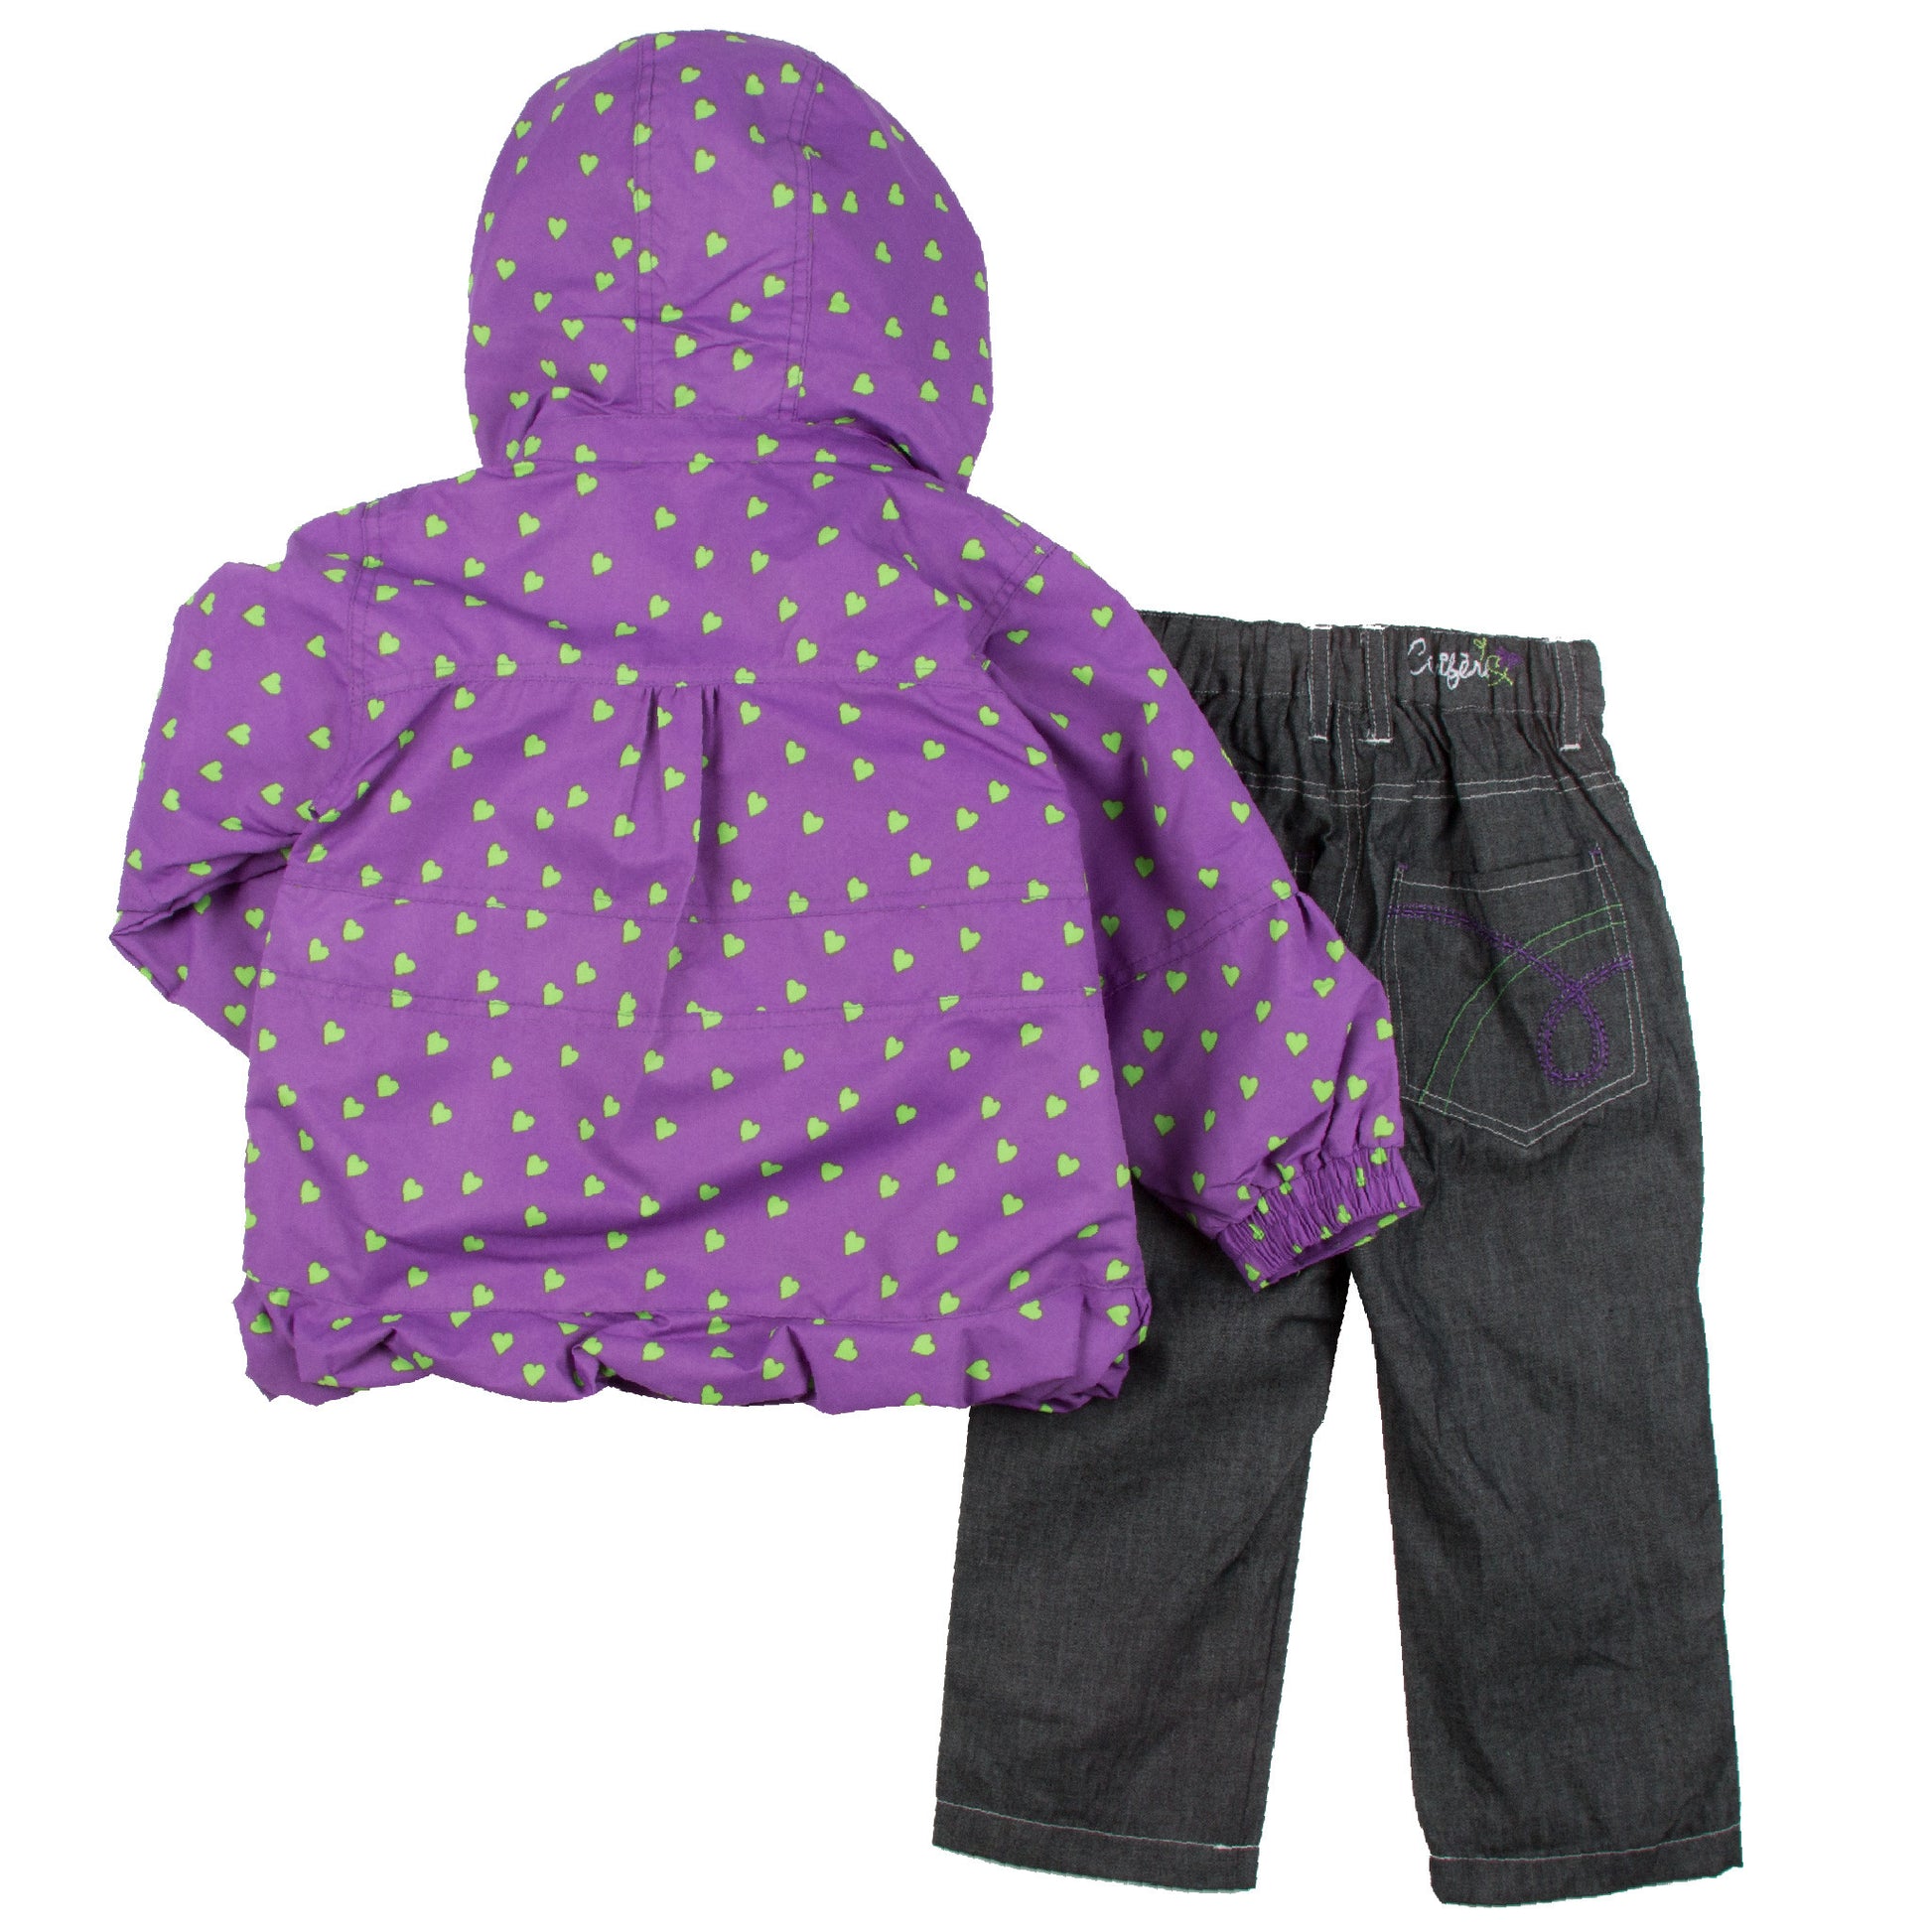 Small Hearts Girls' 3-in-1 Set